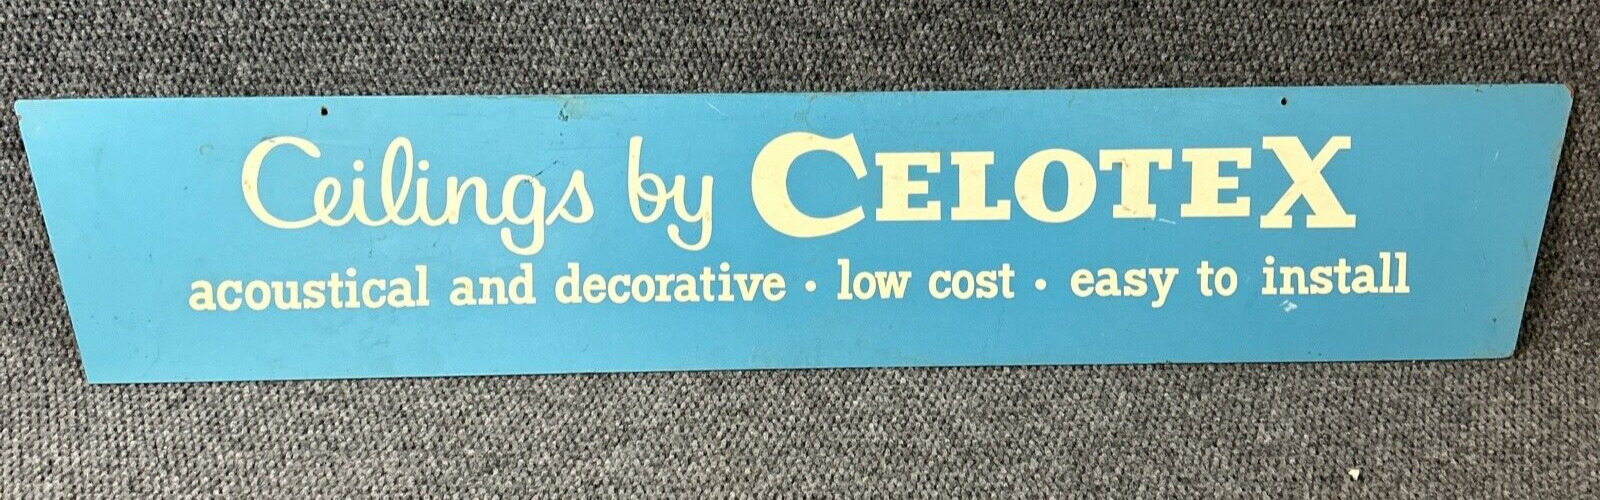 Vtg Large 48 Inch Long Advertising Sign Ceilings by Celotex Blue 50s 60s Wood